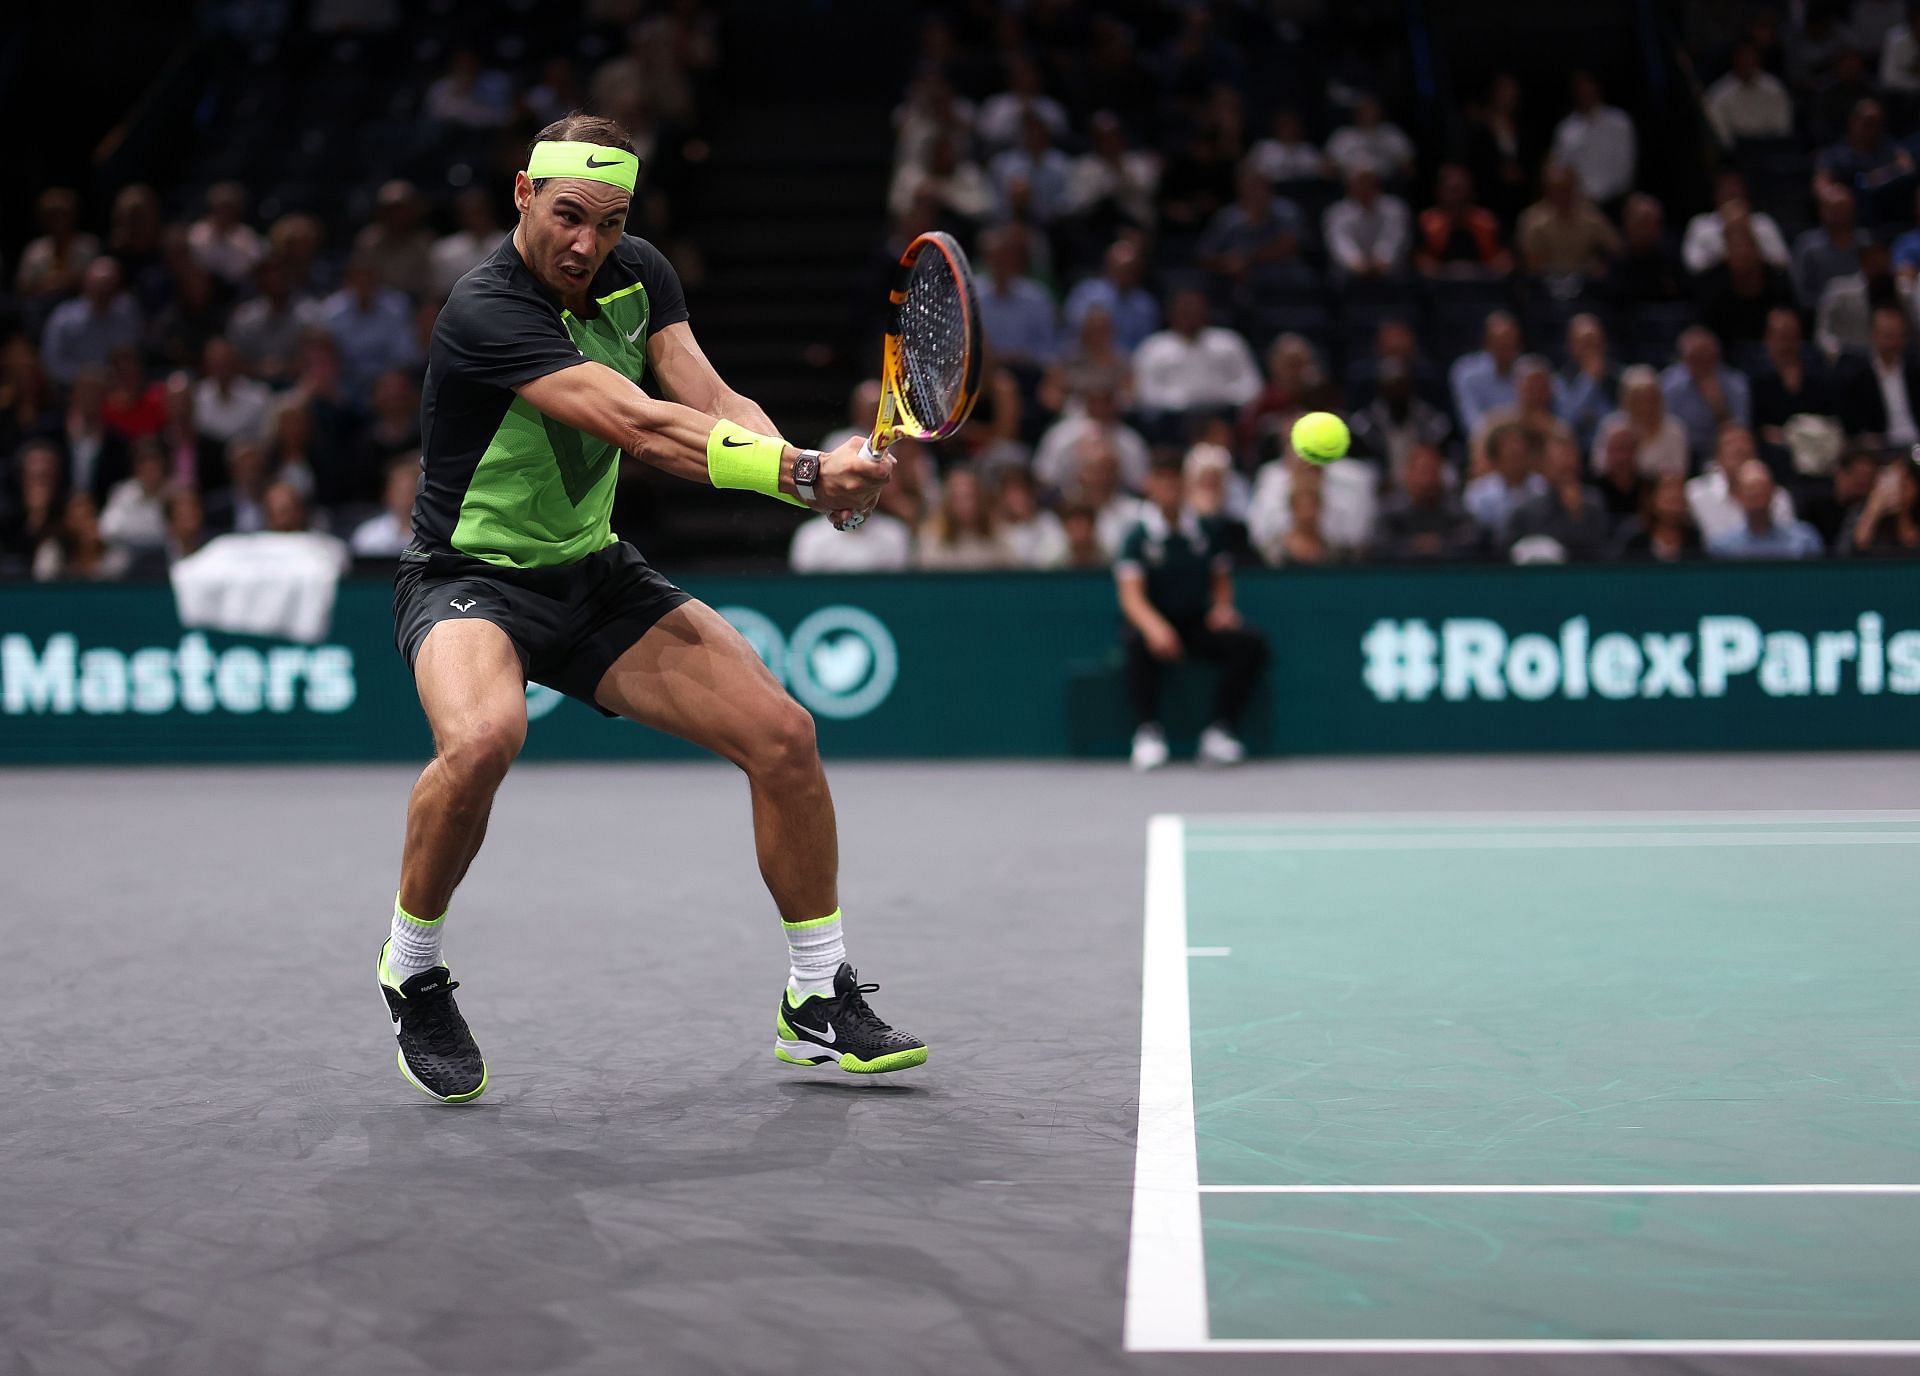 Nadal in action at the Paris Masters